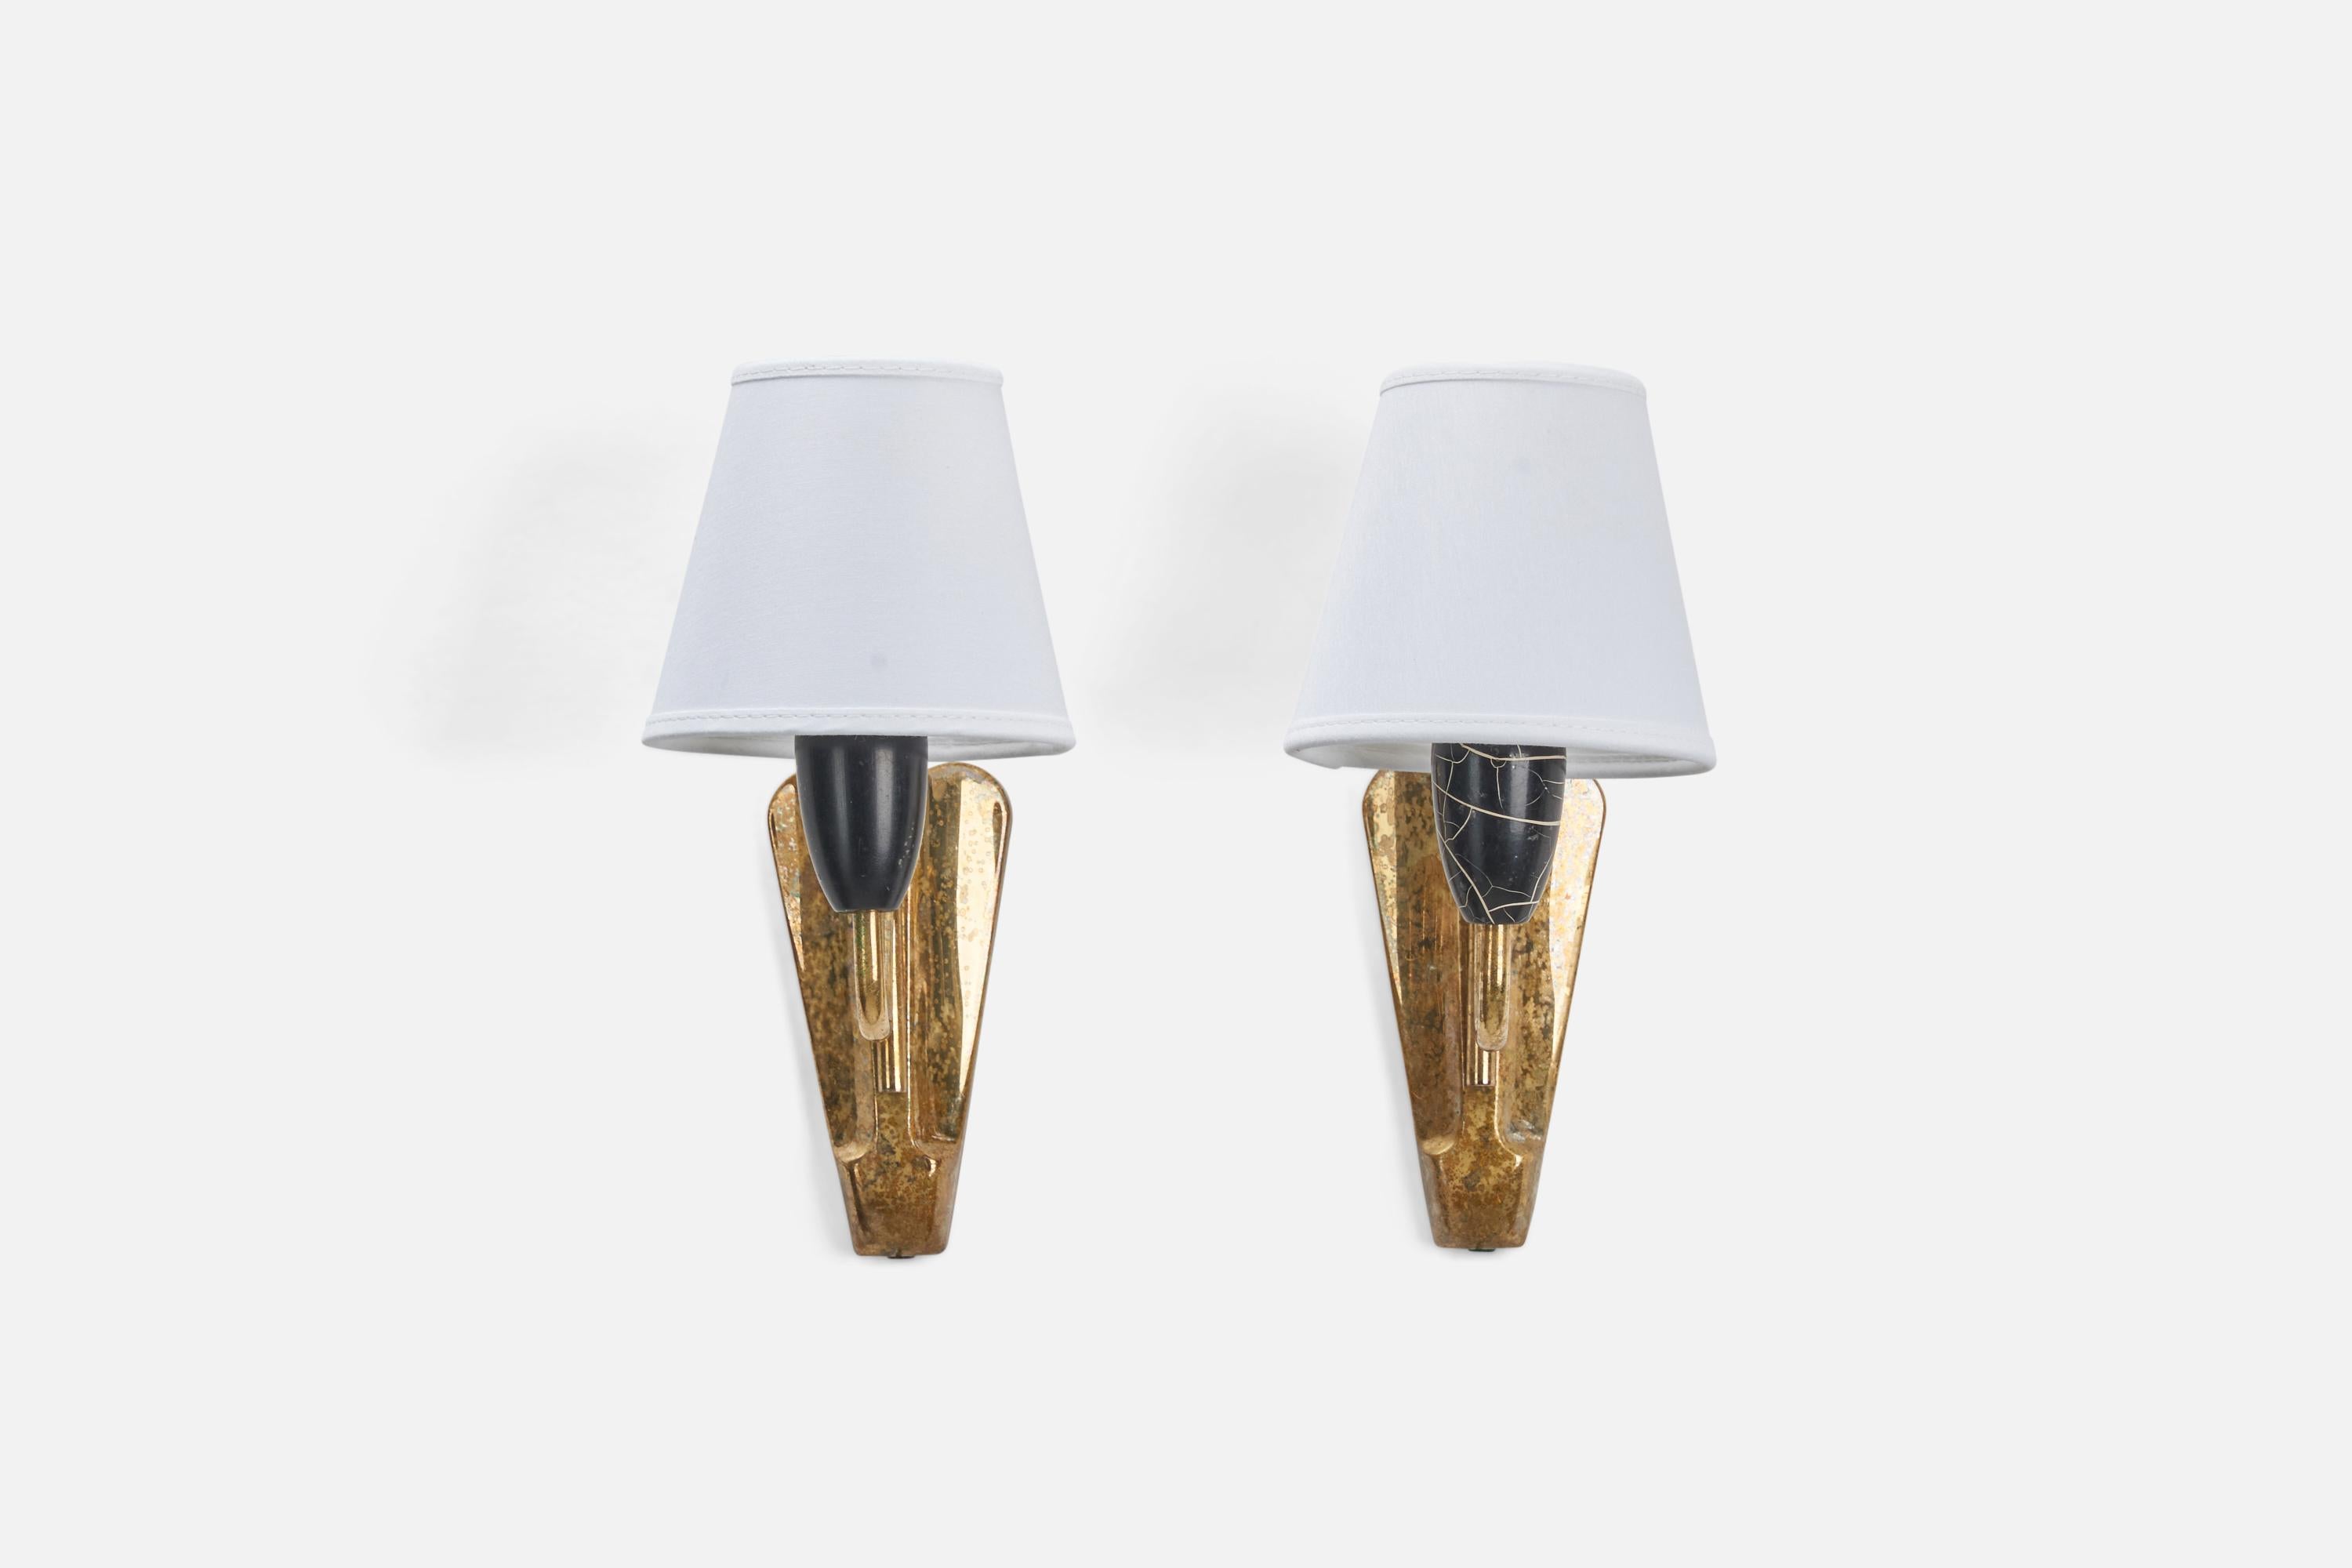 A pair of brass, resin and fabric wall lights designed and produced by Danish Designer, Denmark, 1950s.

Dimensions stated are of sconces with lampshades.

Dimensions of Back Plate (inches) : 5.15 x 2.57 x 0.86 (Height x Width x